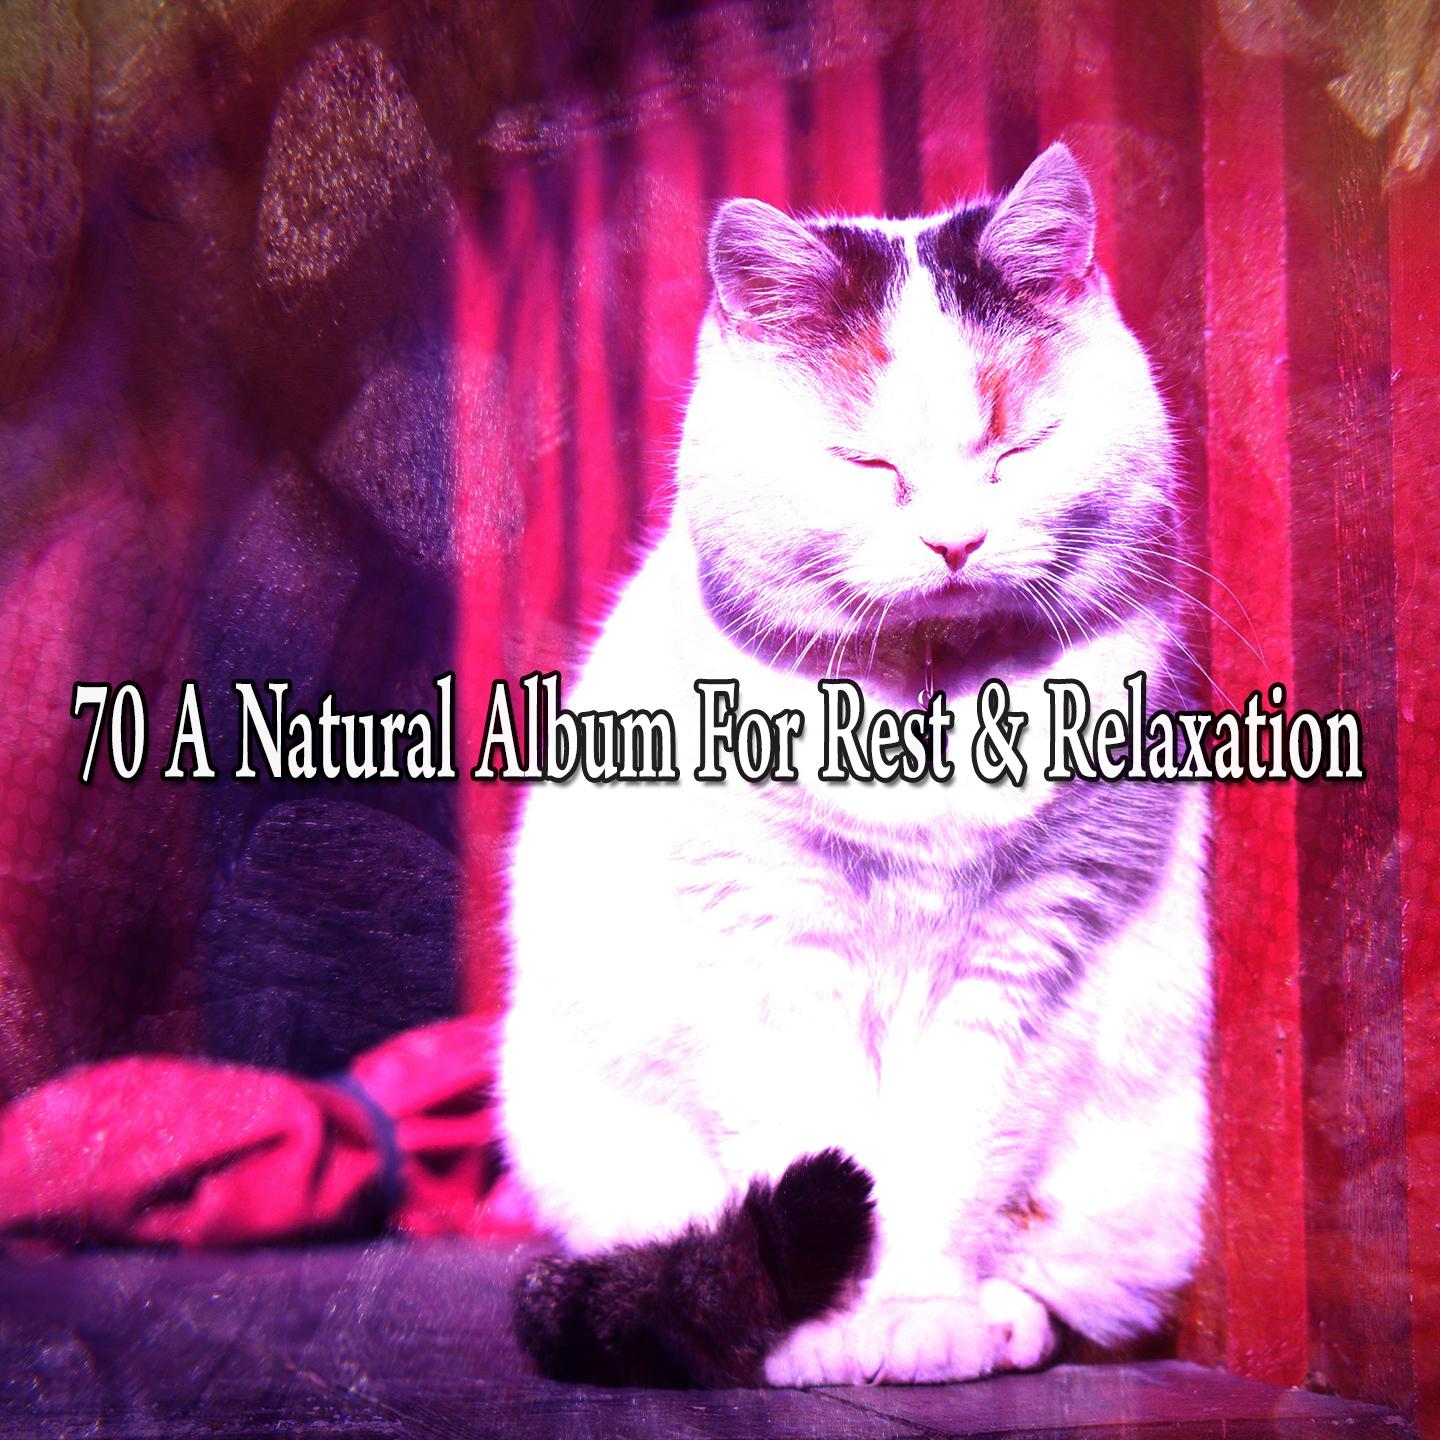 70 A Natural Album for Rest & Relaxation